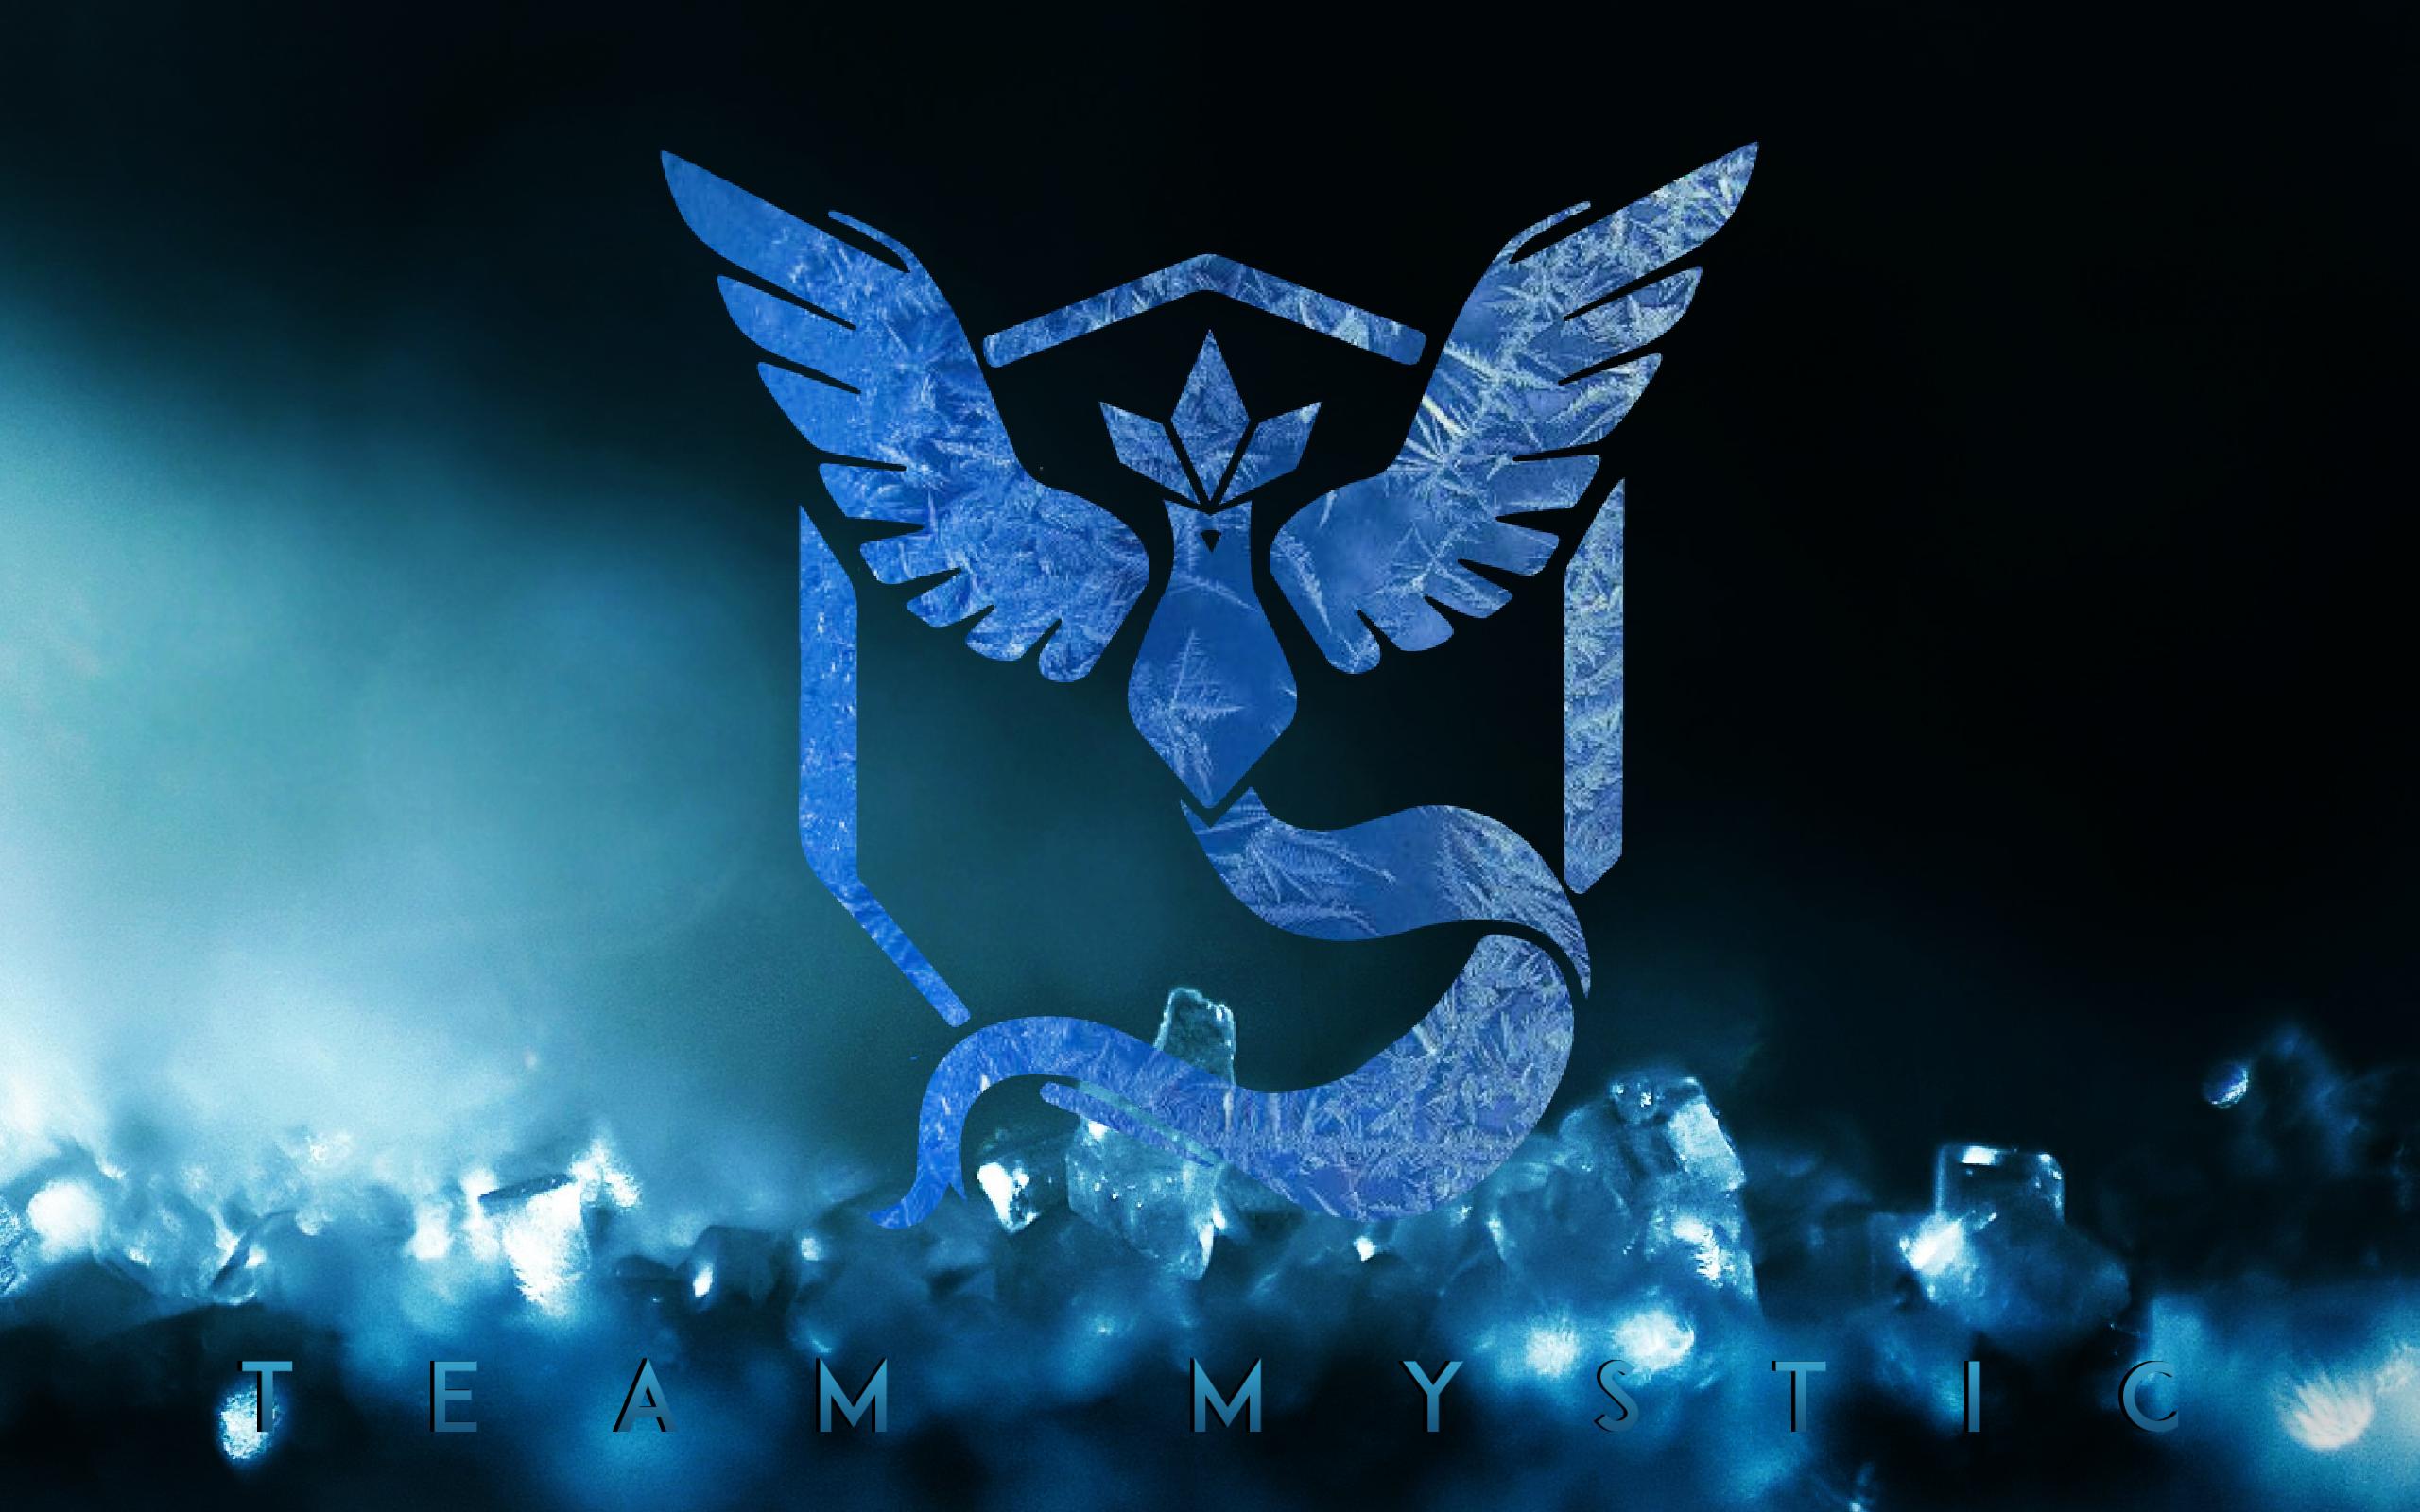 team mystic live wallpaper,blue,wing,darkness,fictional character,graphics